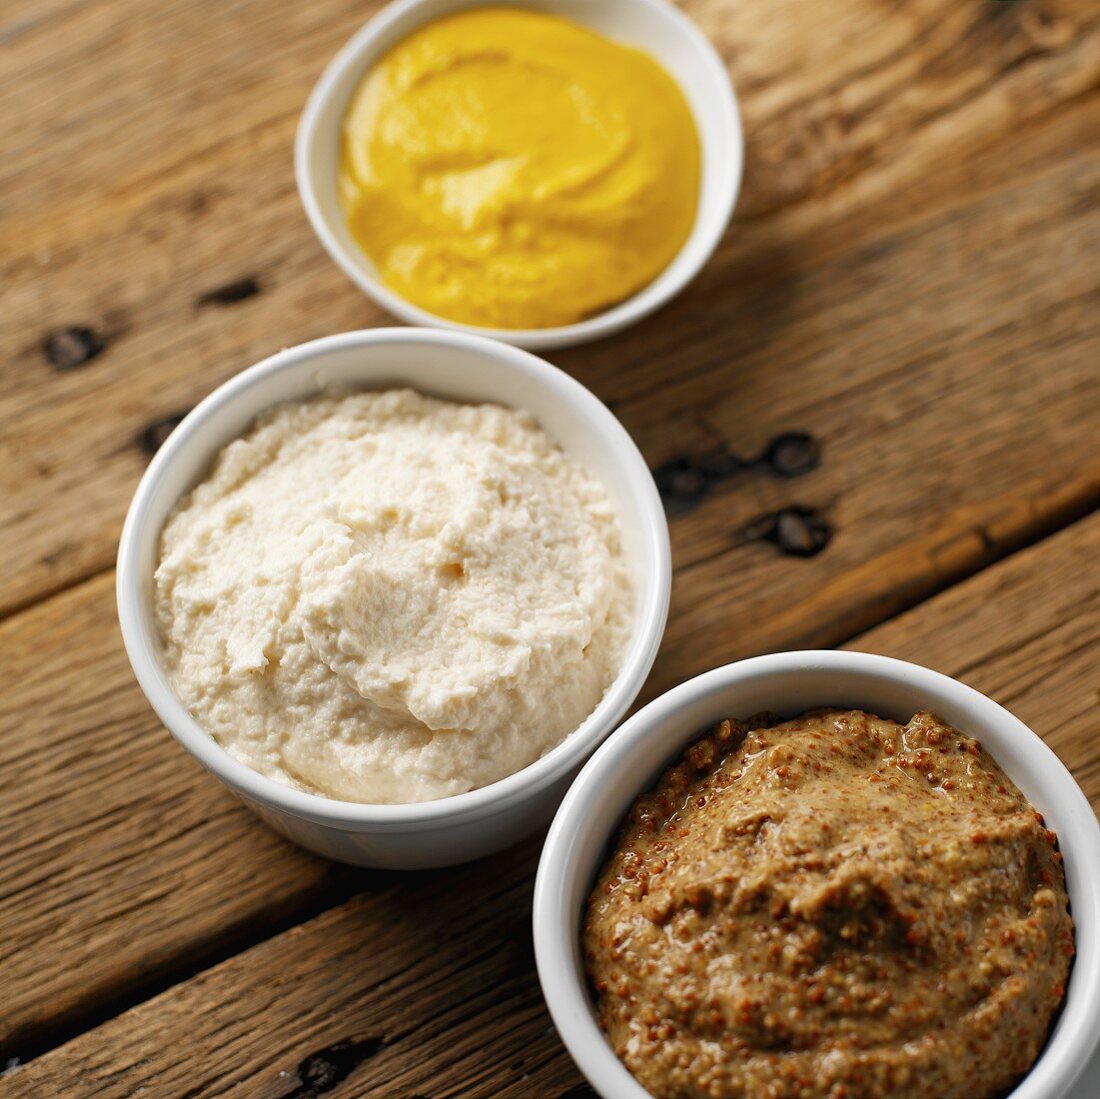 Creamed horseradish & two sorts of mustard in small dishes